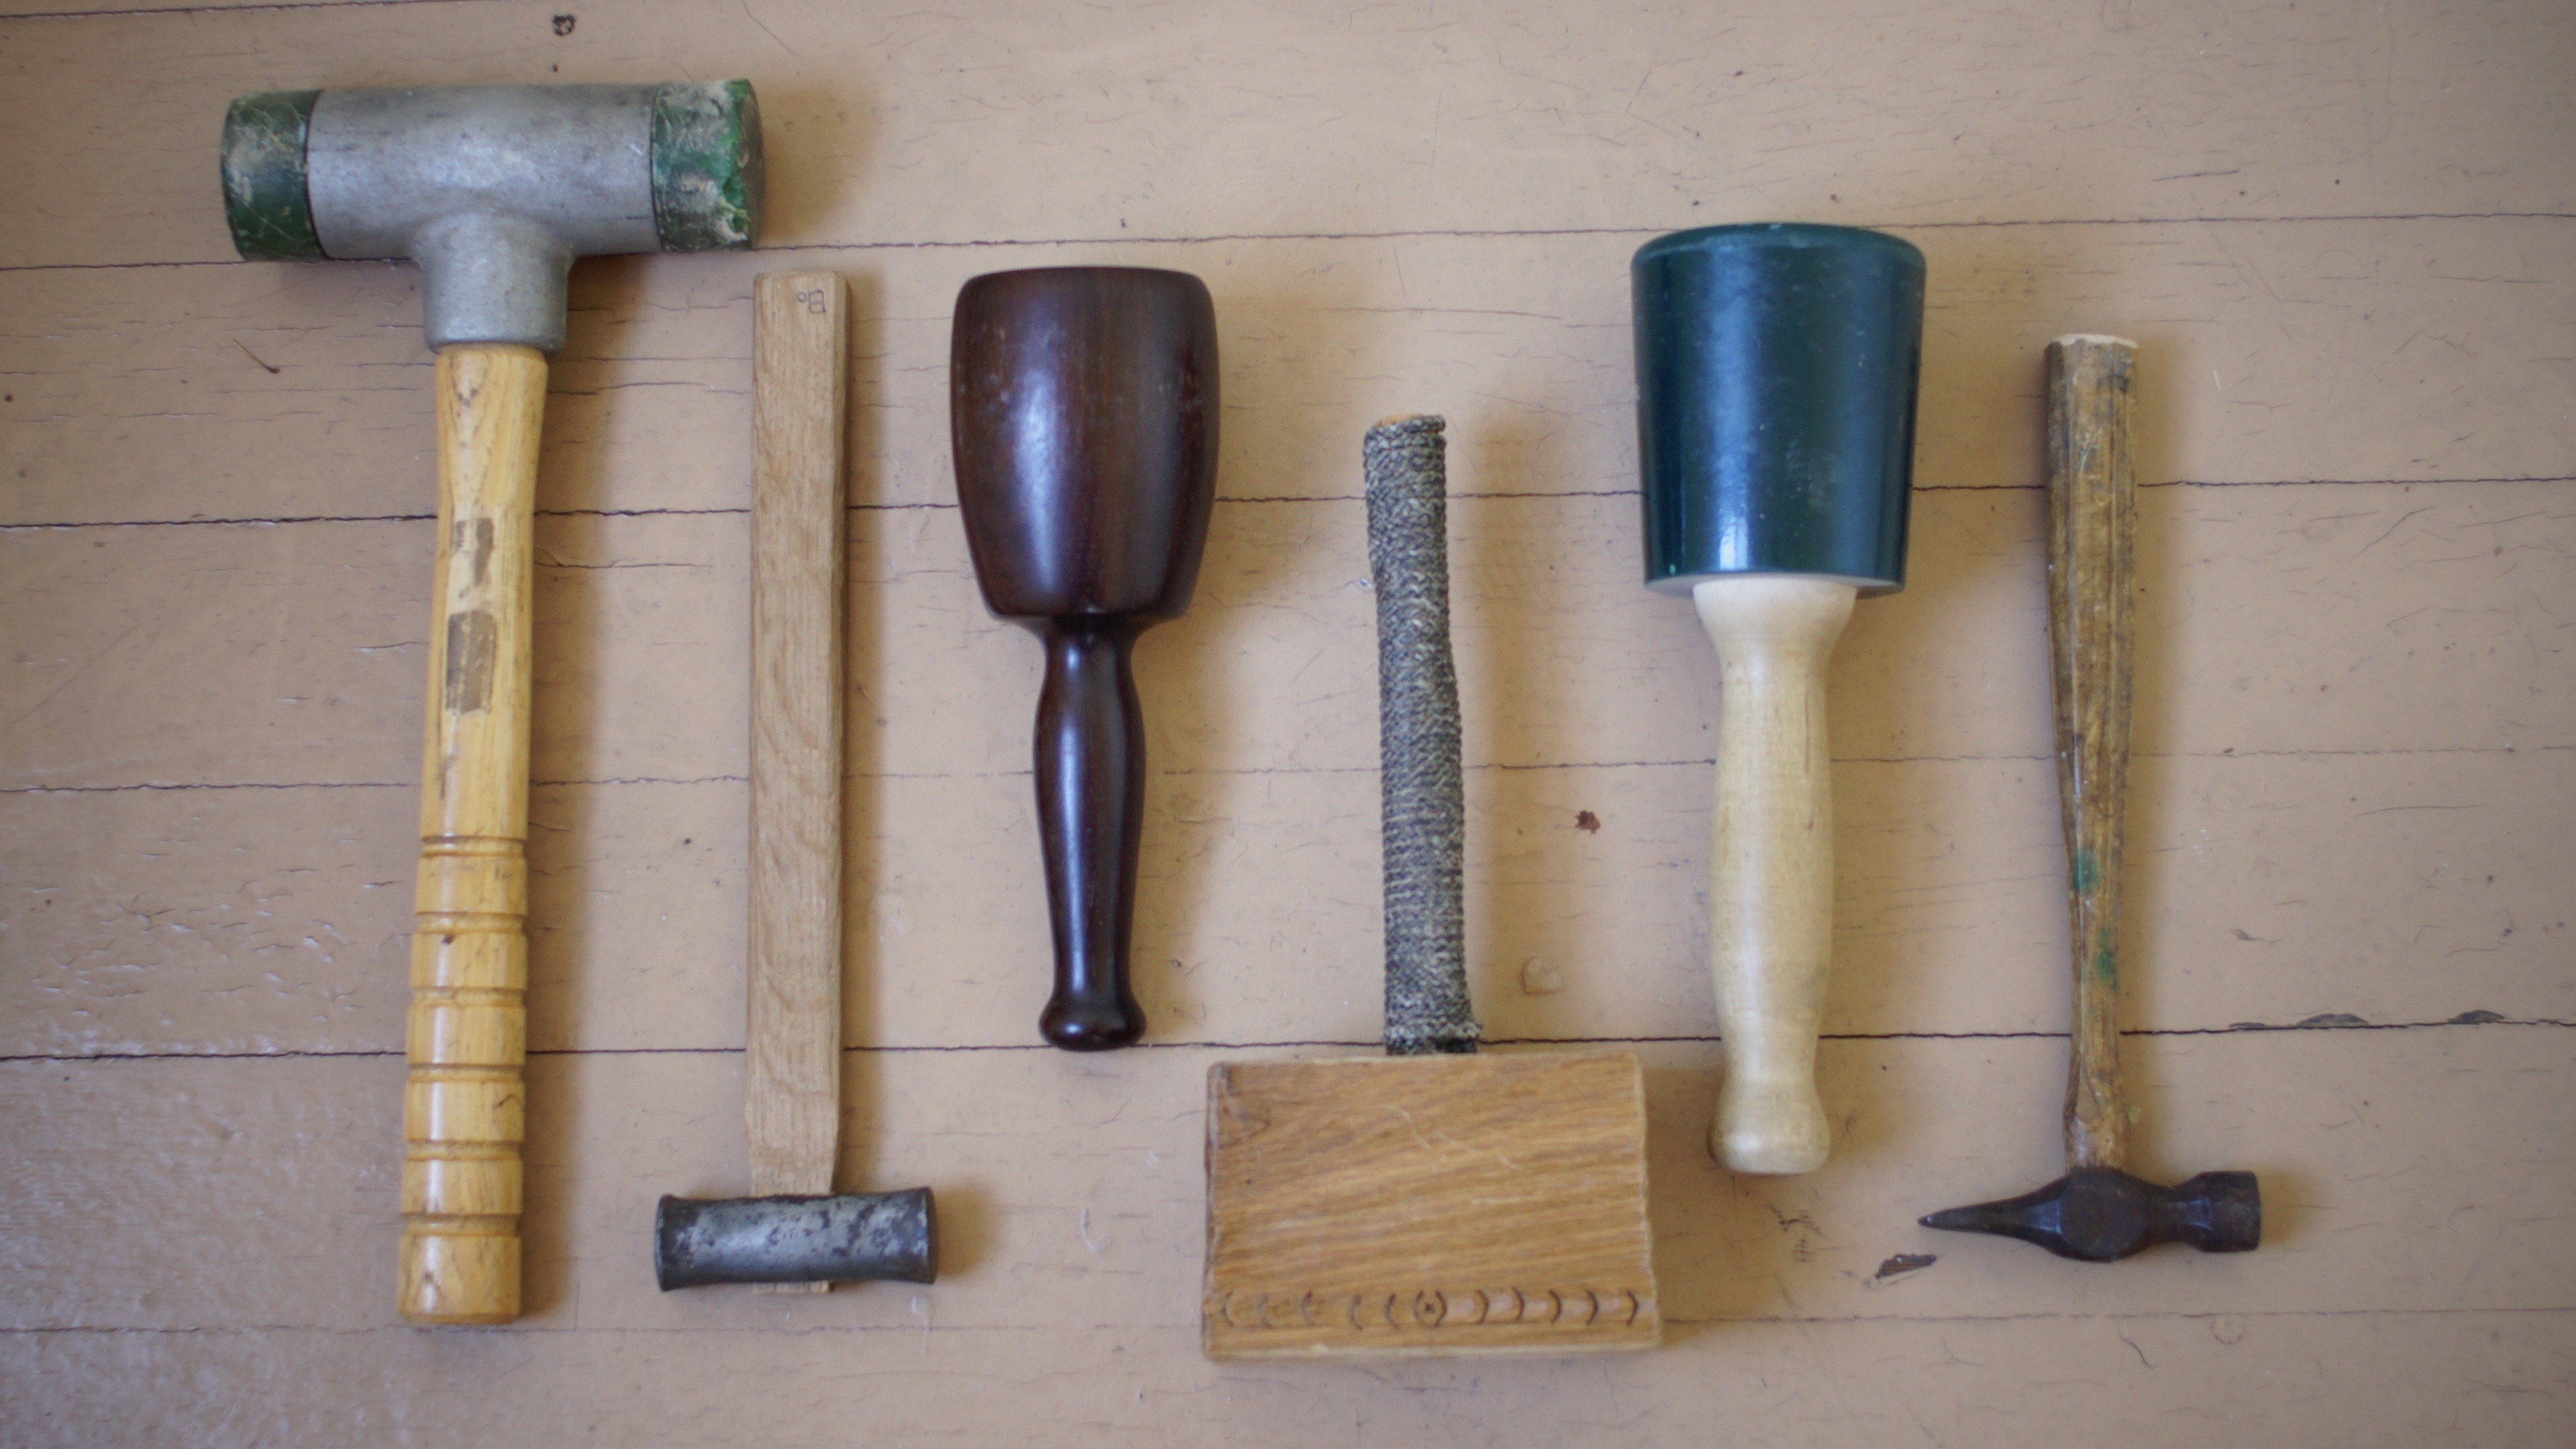 Hammers and Mallets - FineWoodworking